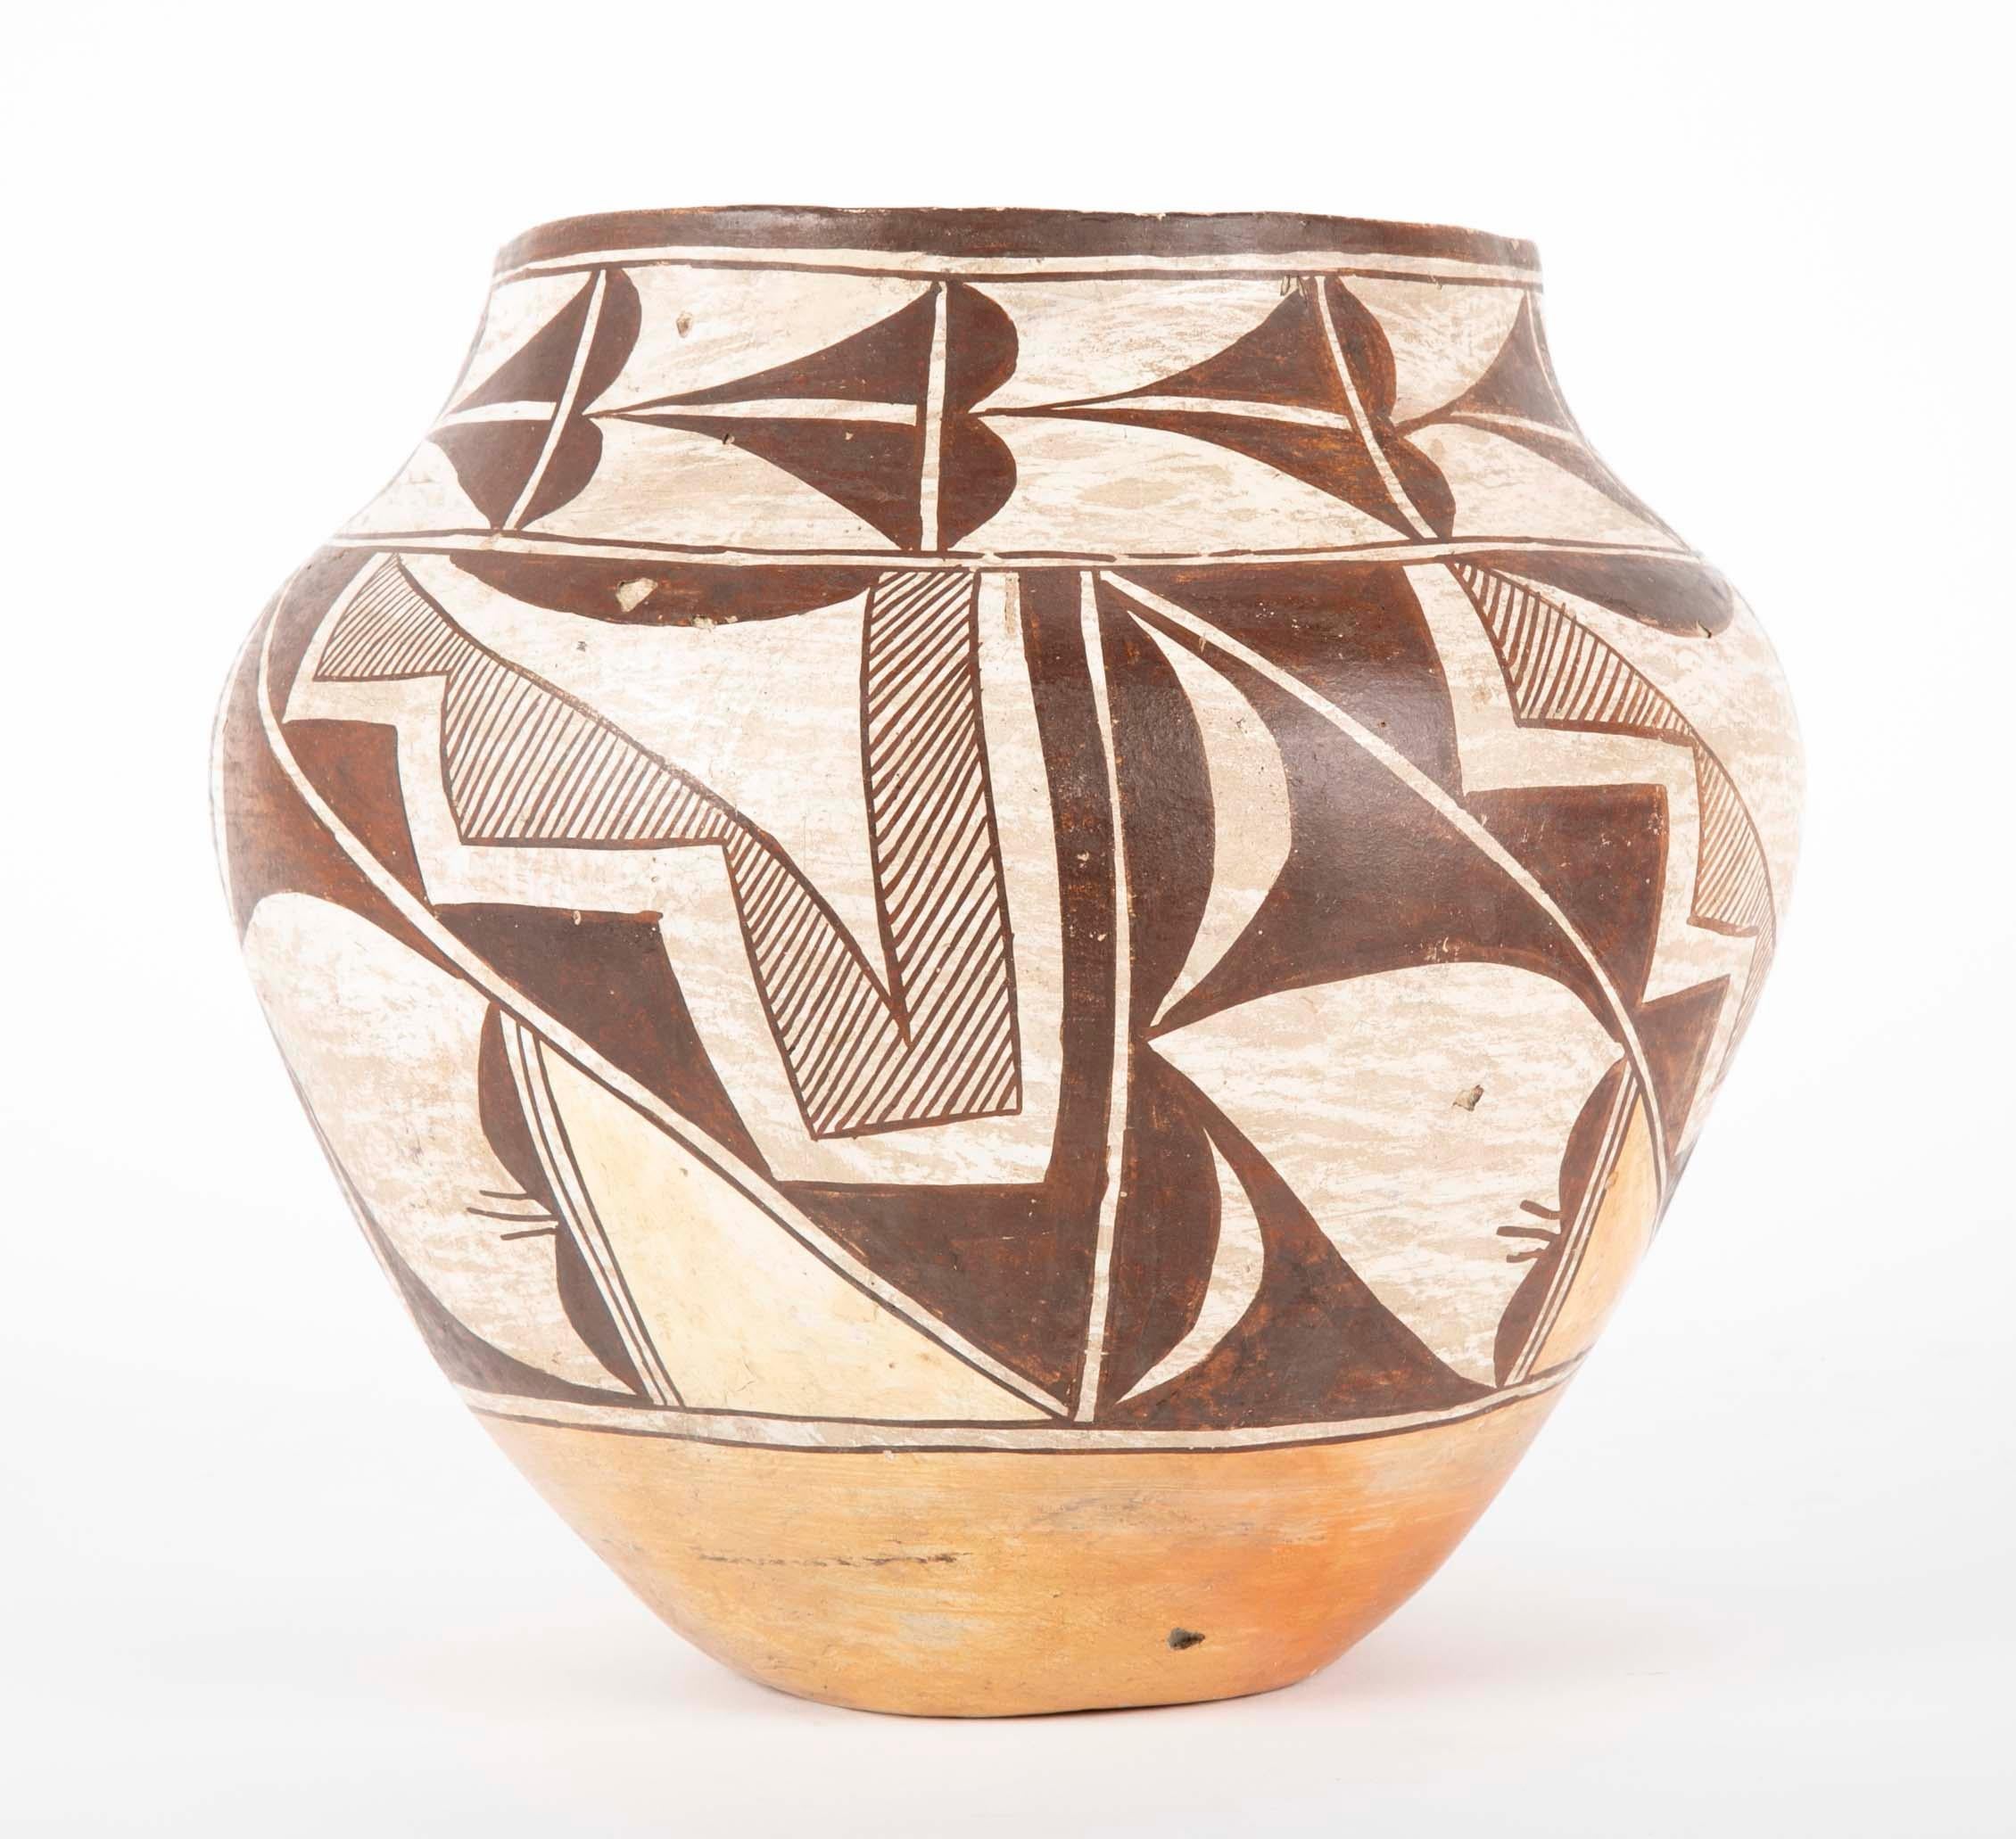 An Acoma clay vase from the 2nd quarter of the 20th century with black geometric line decoration on white background. Traditional Acoma pottery is made using a slate-like clay found within the hills surrounding the Pueblo. The pots are made using a